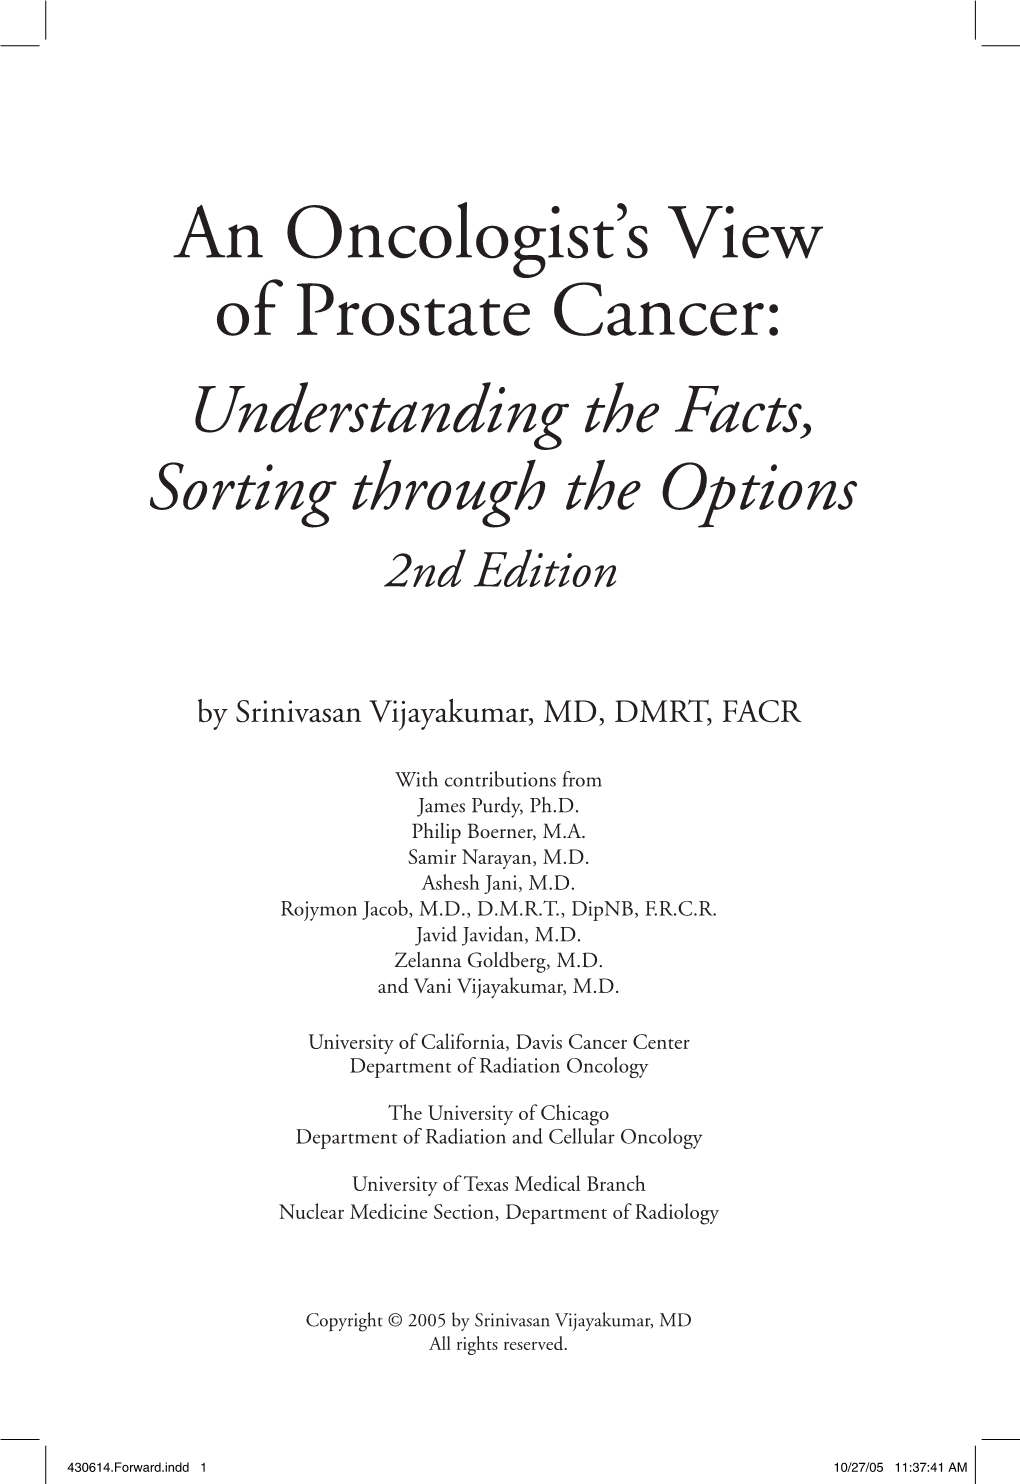 An Oncologist's View of Prostate Cancer